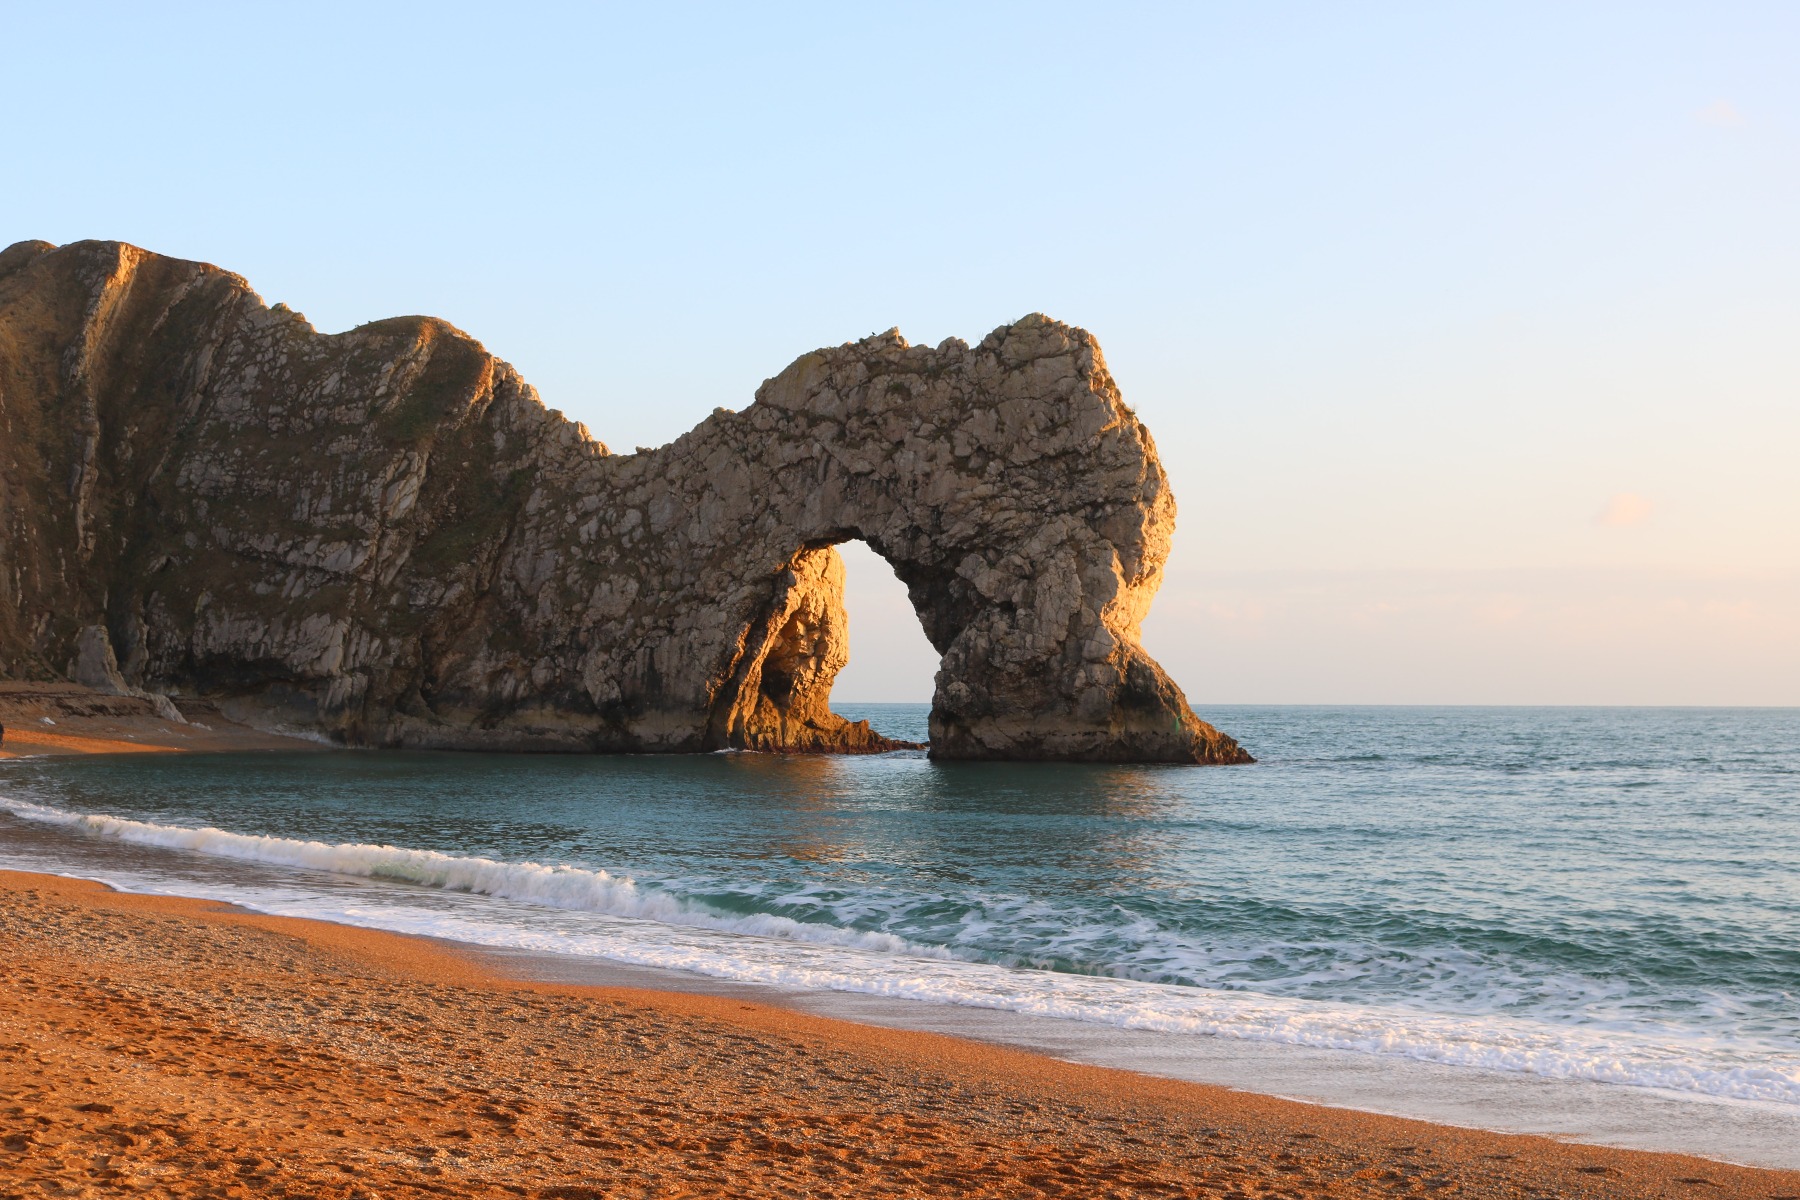 It's impossible to not get a great picture of Durdle Door, seriously!